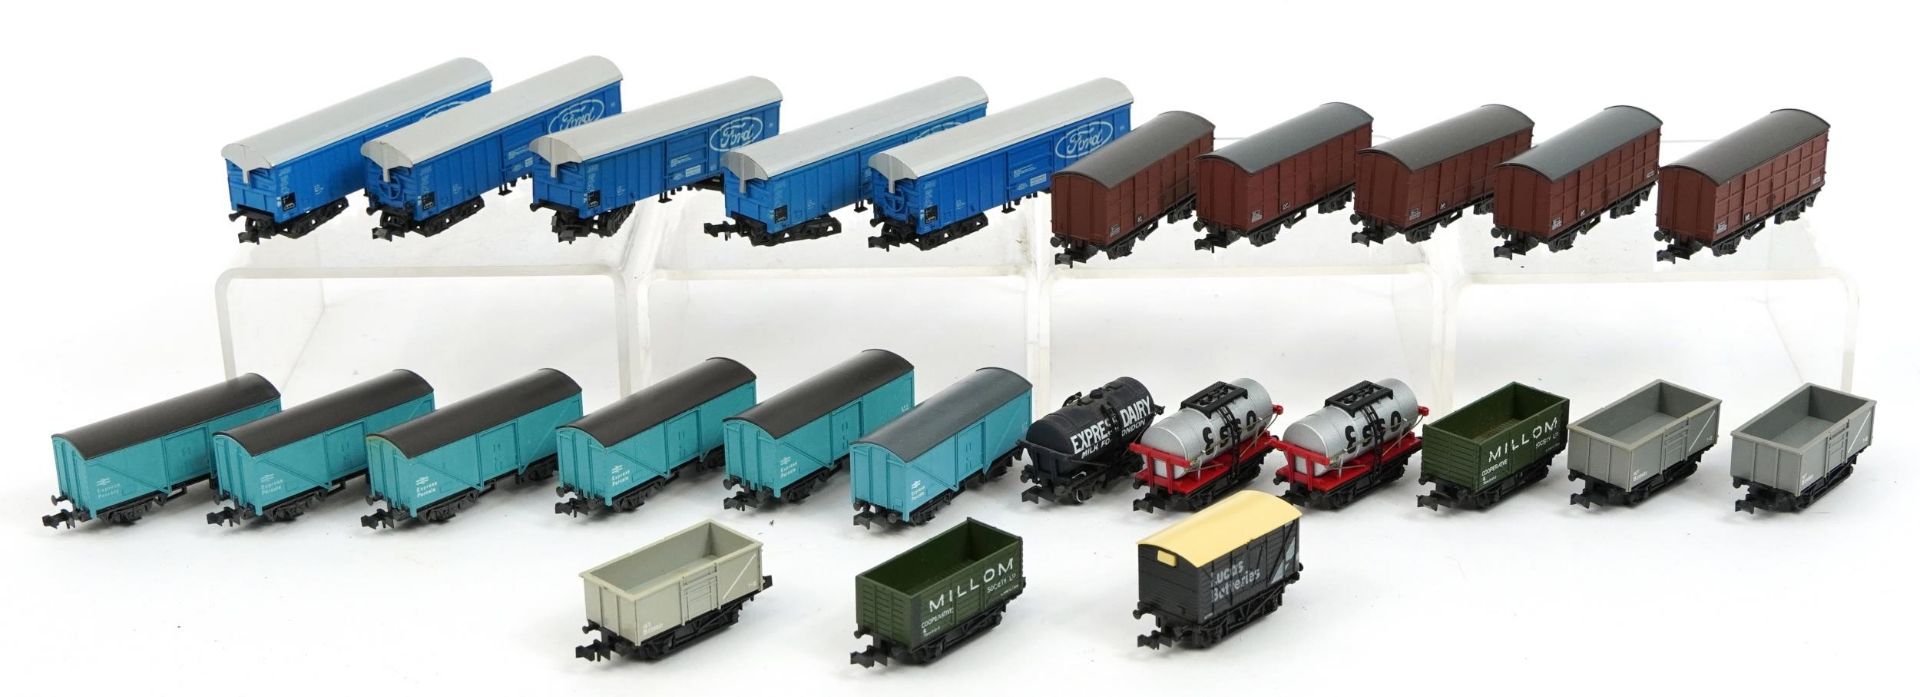 Twenty five N gauge model railway wagons and tankers including Peco and Trix, housed in two